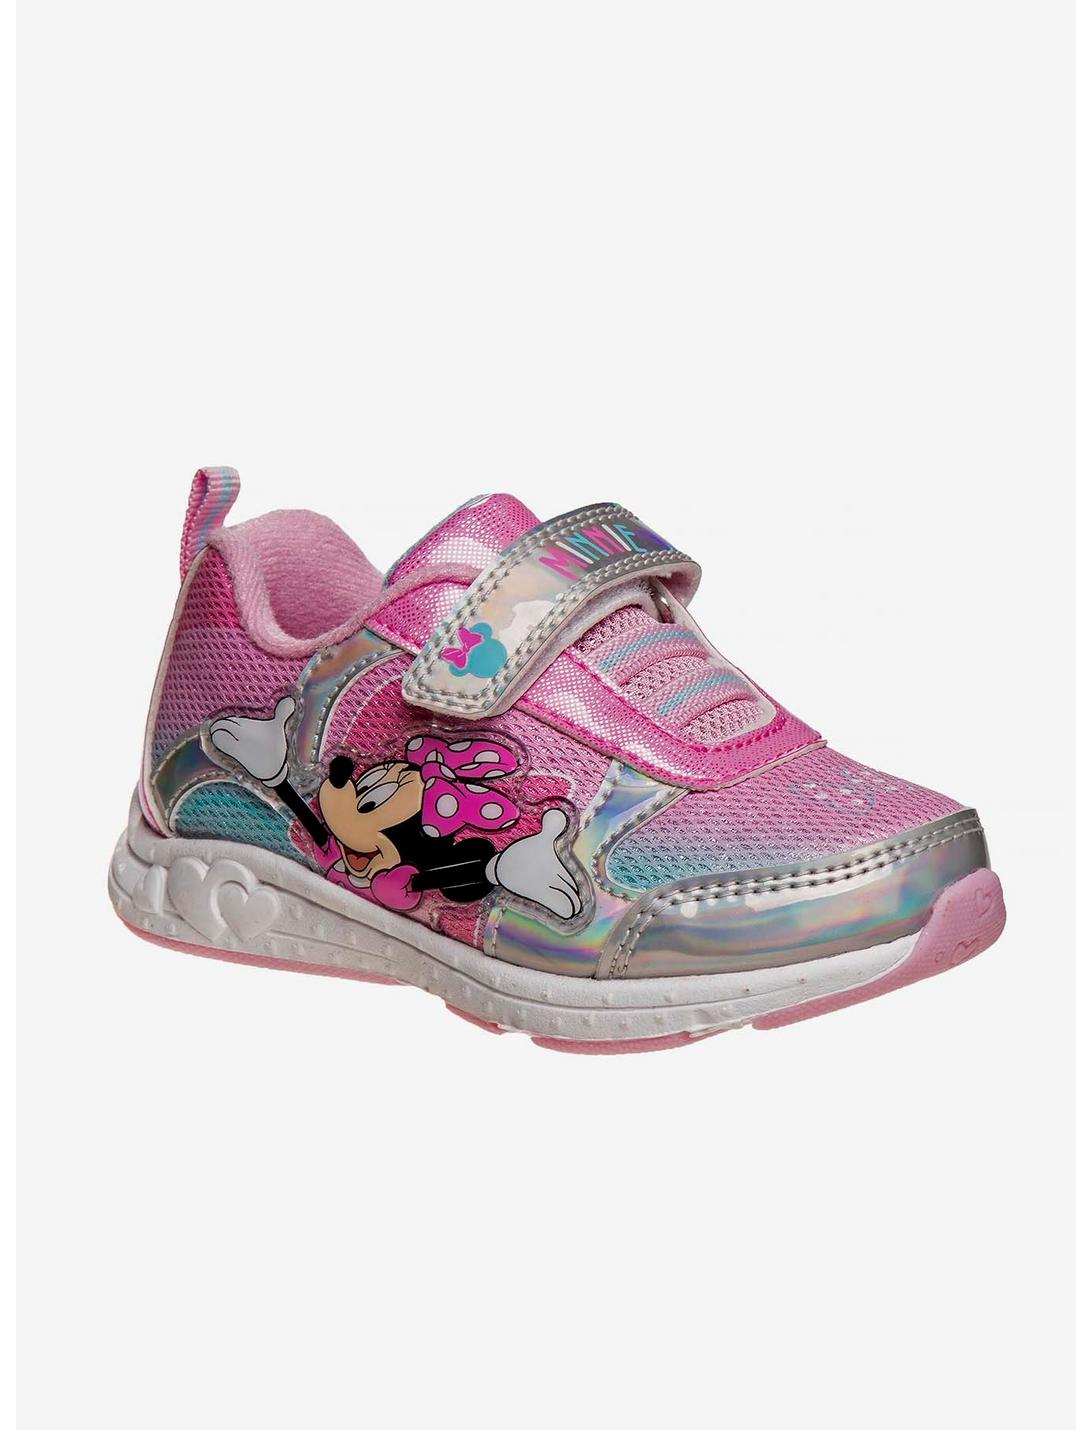 Disney Minnie Mouse Girls Sneaker With Light, PINK, hi-res